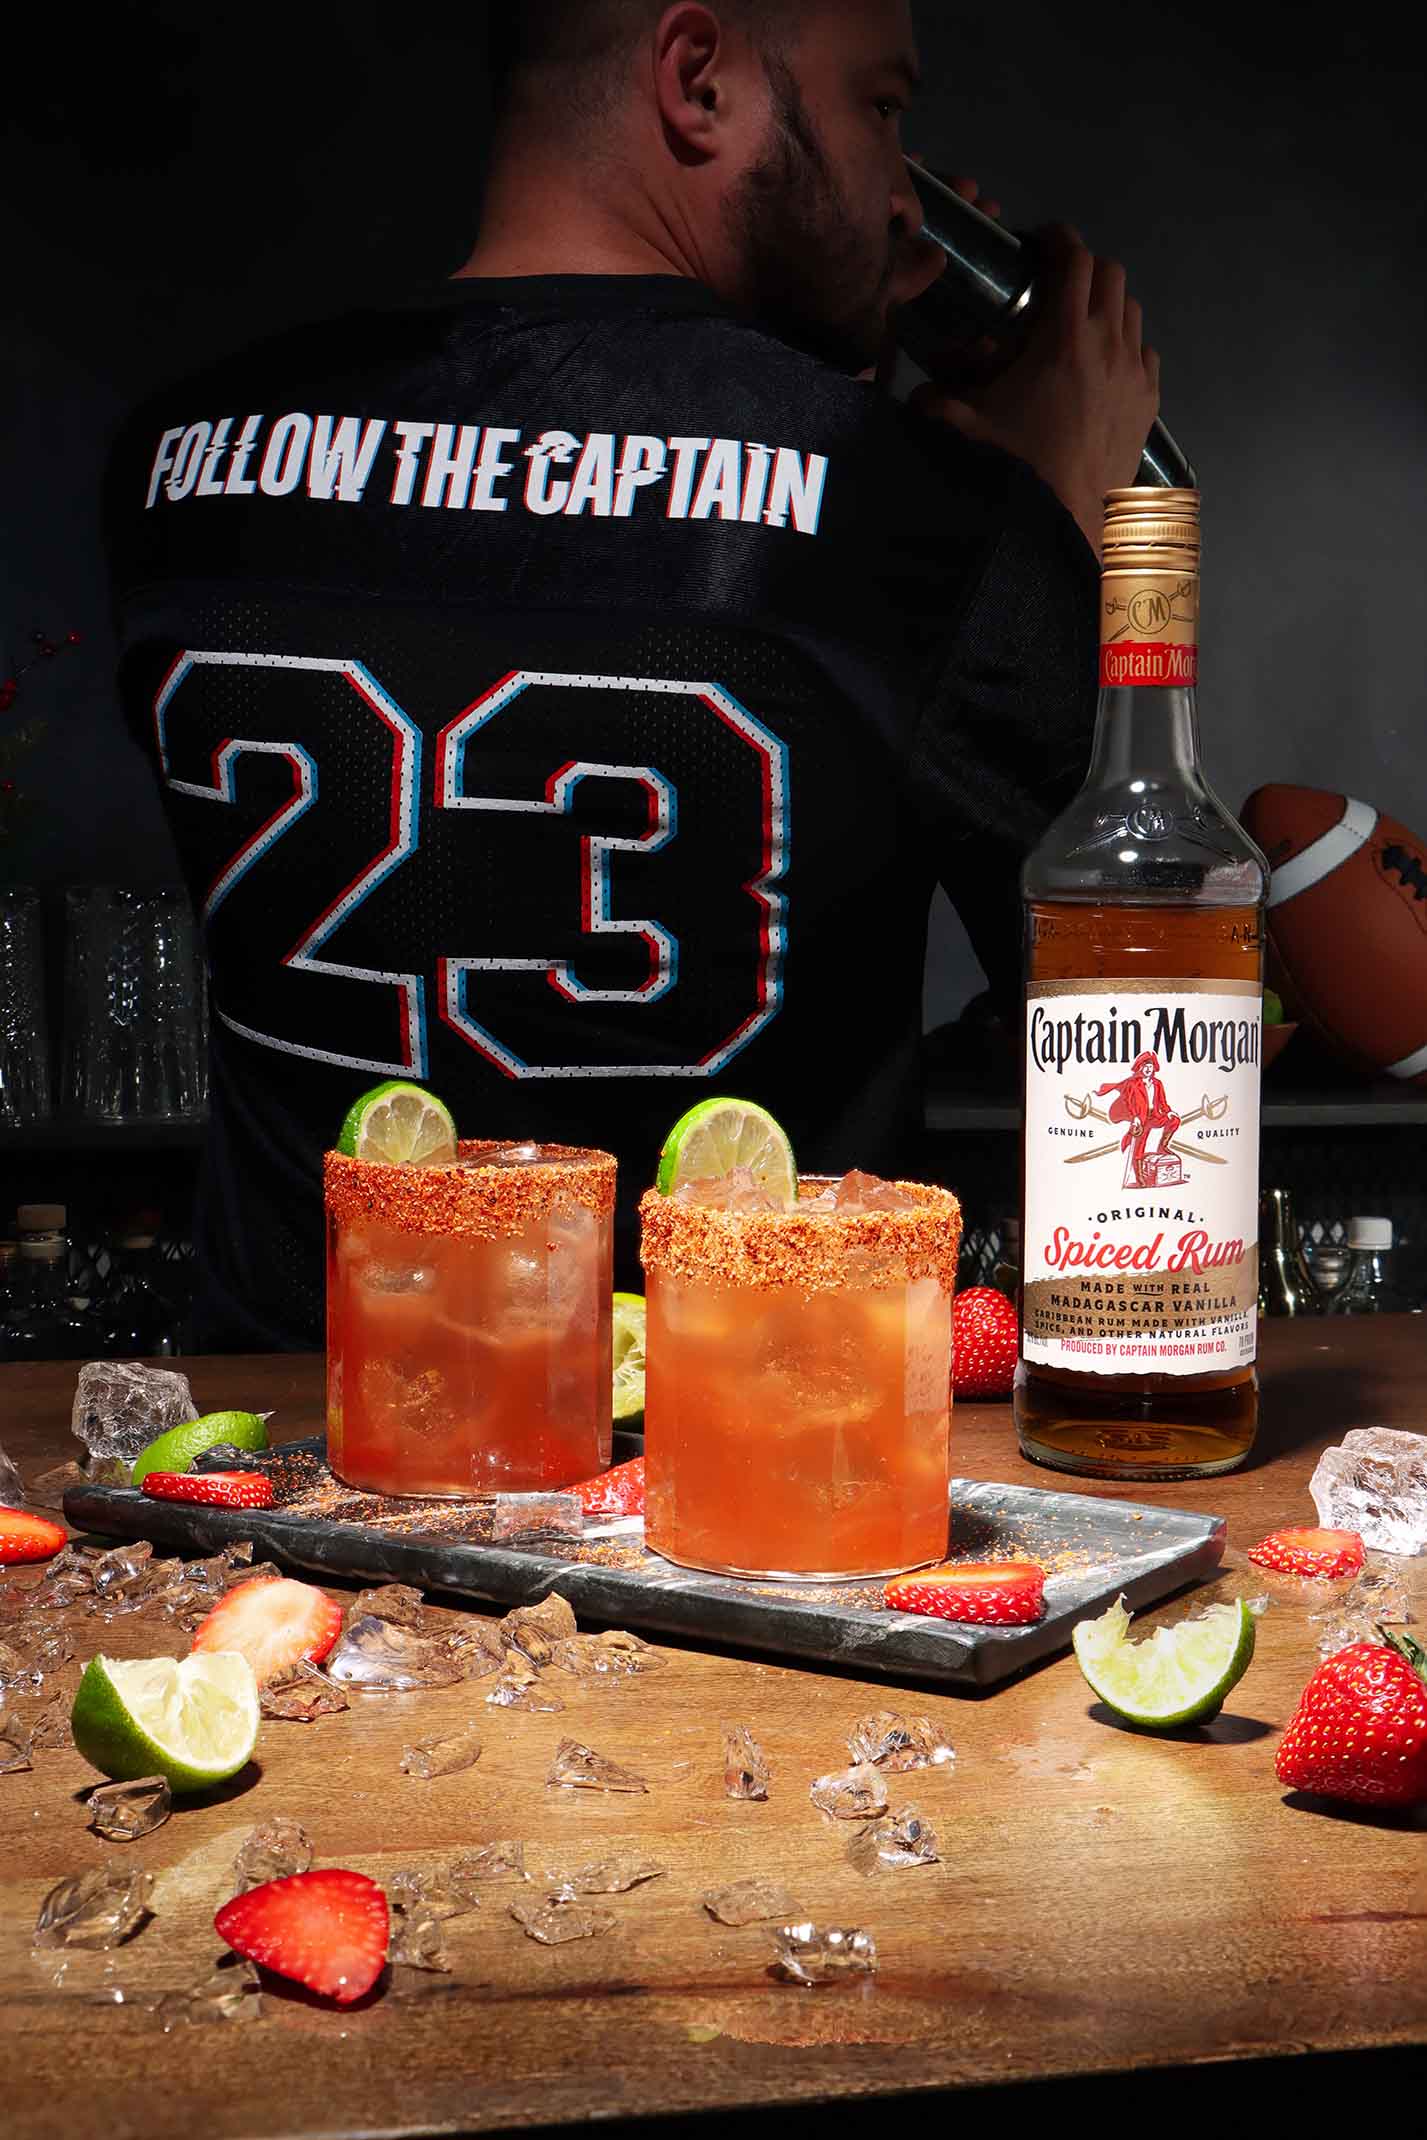 Captain Morgan bottle with Strawberry Rumrita cocktail and jersey.